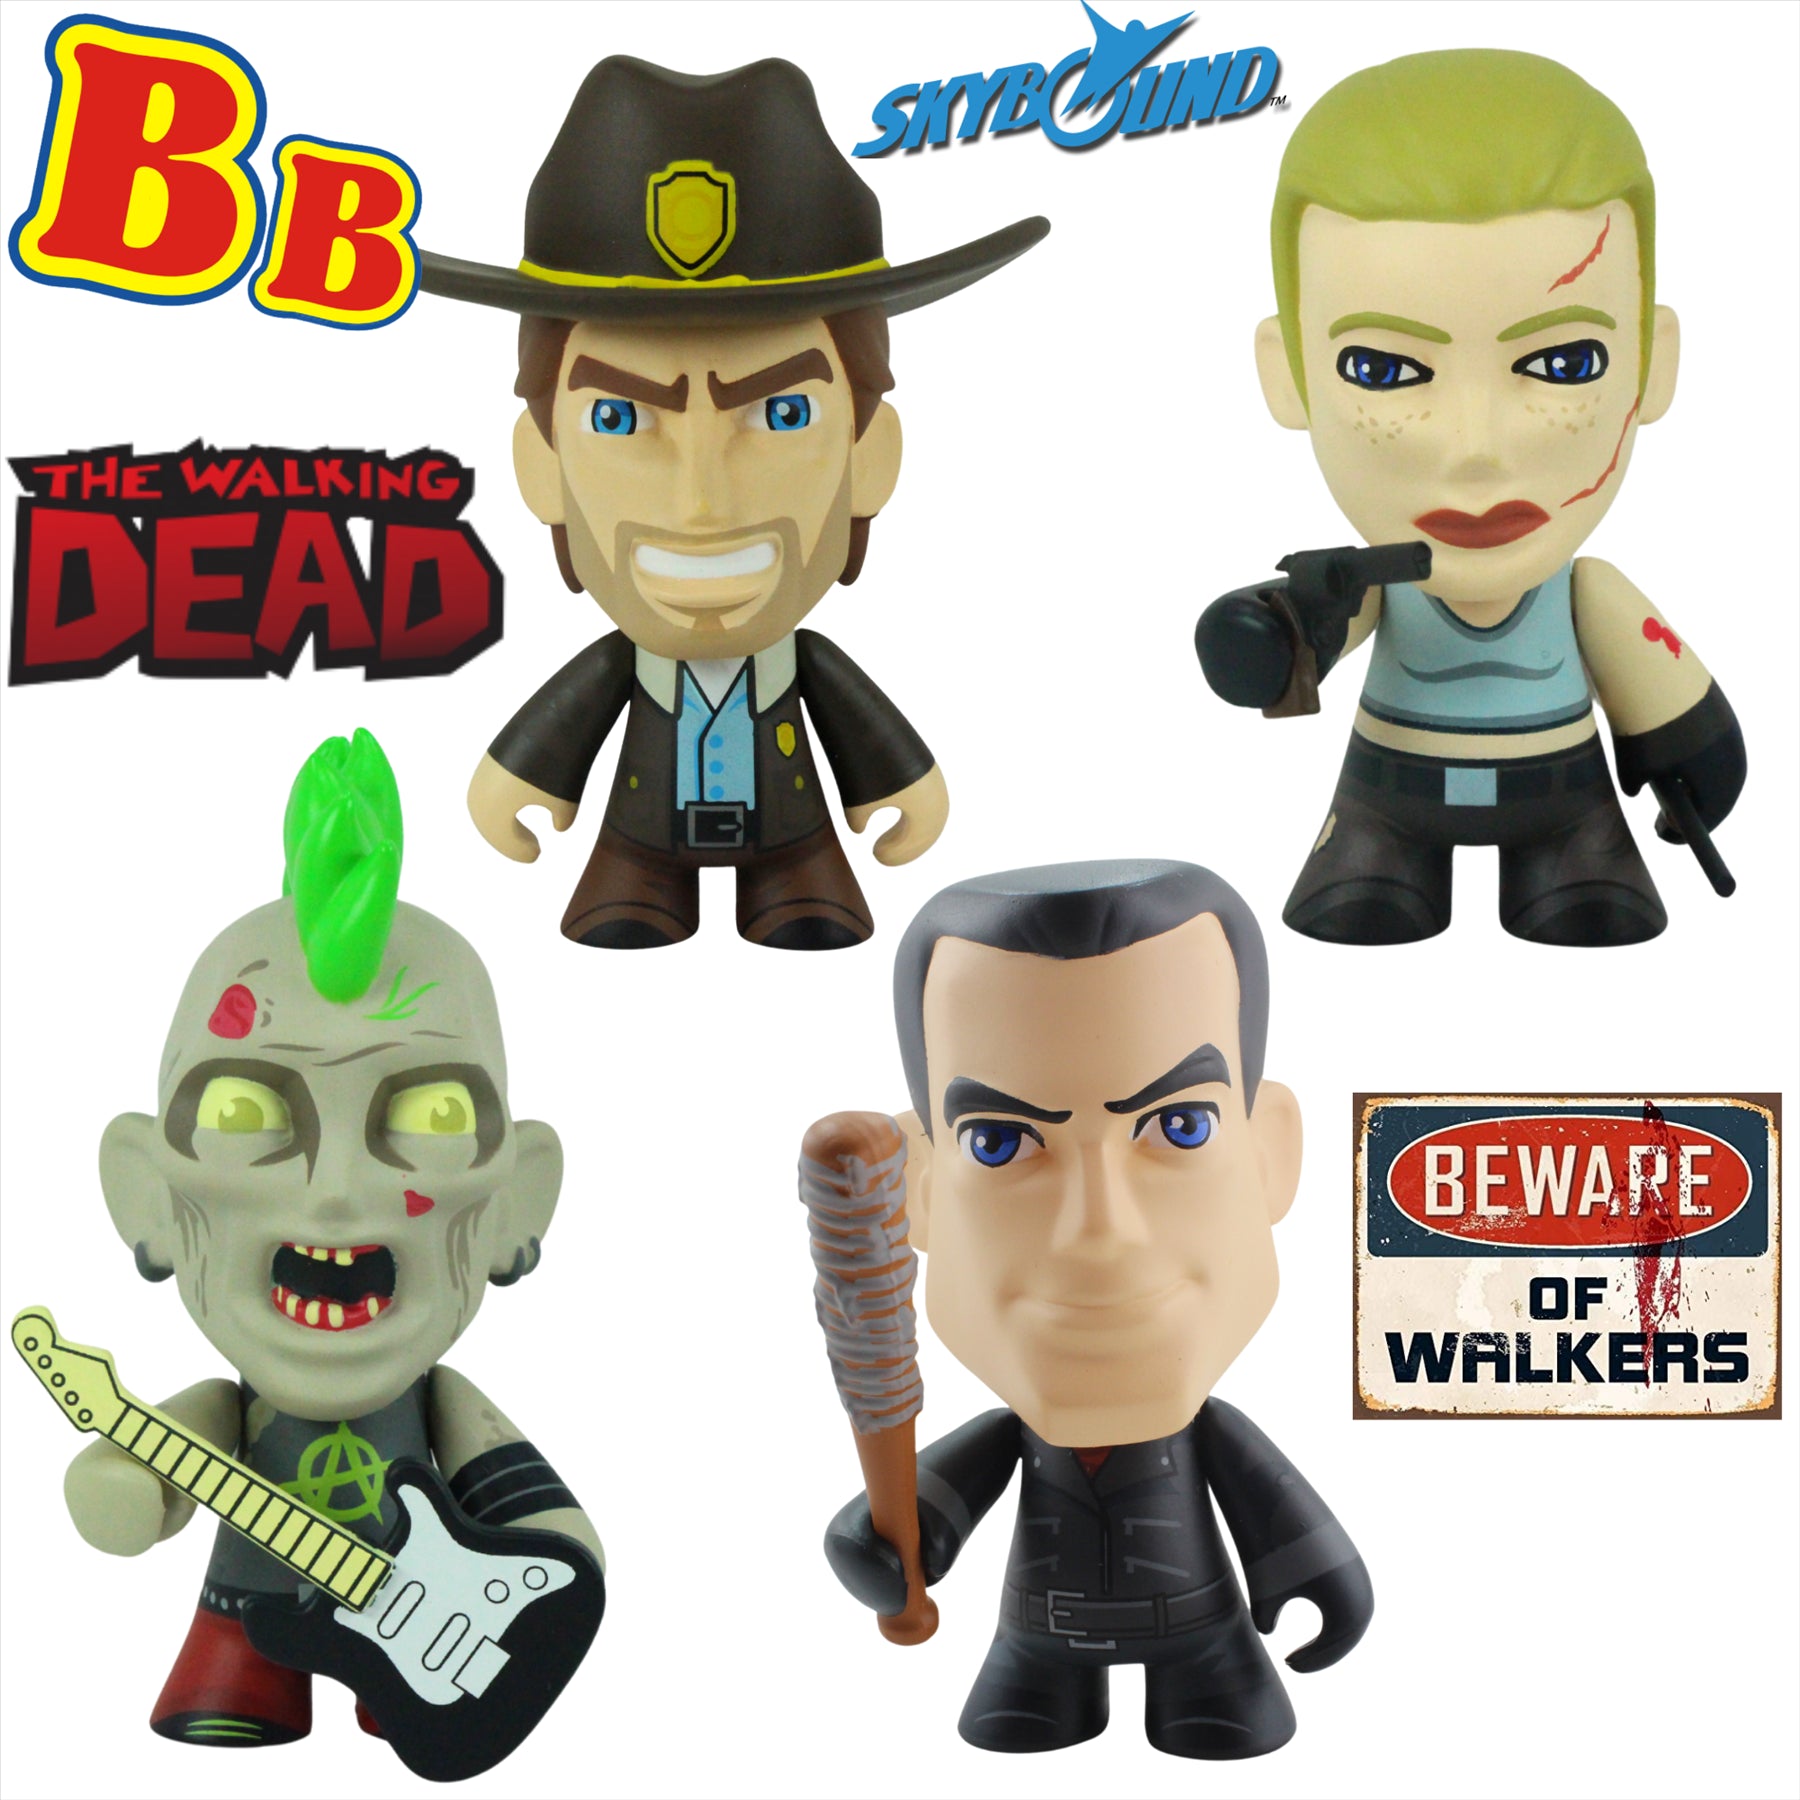 Skybound Minis Series 1 - The Walking Dead 3" 8cm Articulated Collectible Figure Sets - Rick Grimes, Andrea, Zombie Punk, and Negan - Toptoys2u